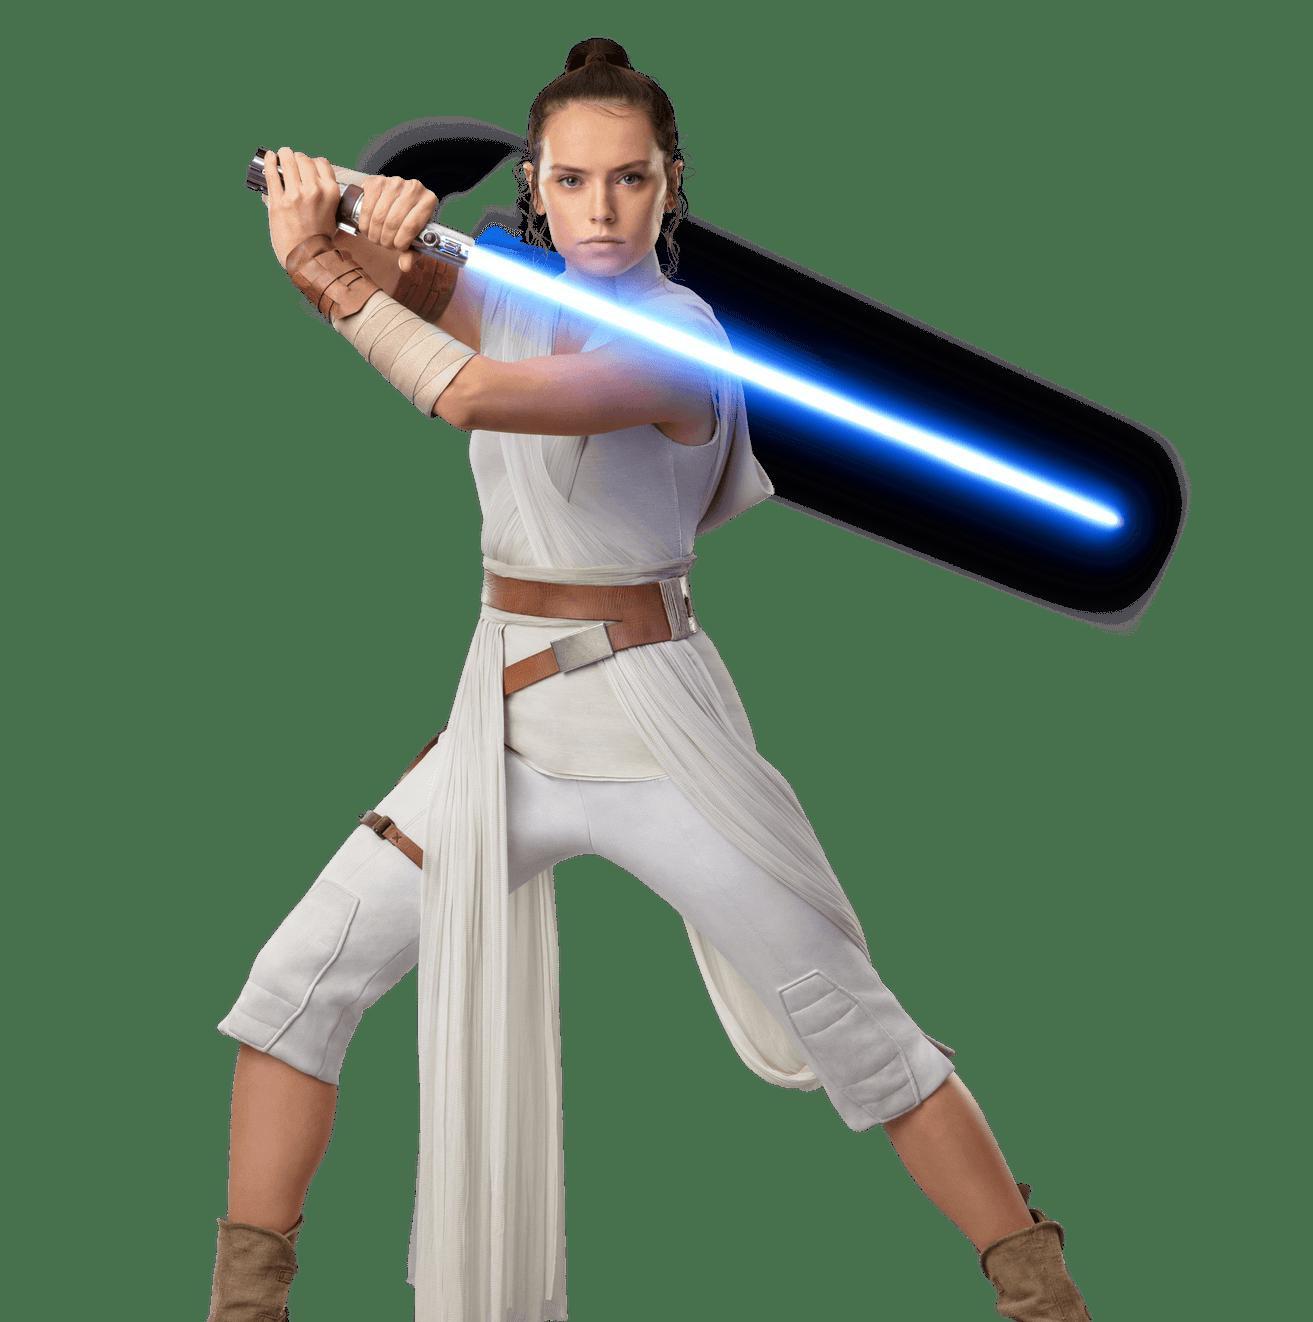 Download Star Of Rise Skywalker Wars Photos The HQ PNG Image